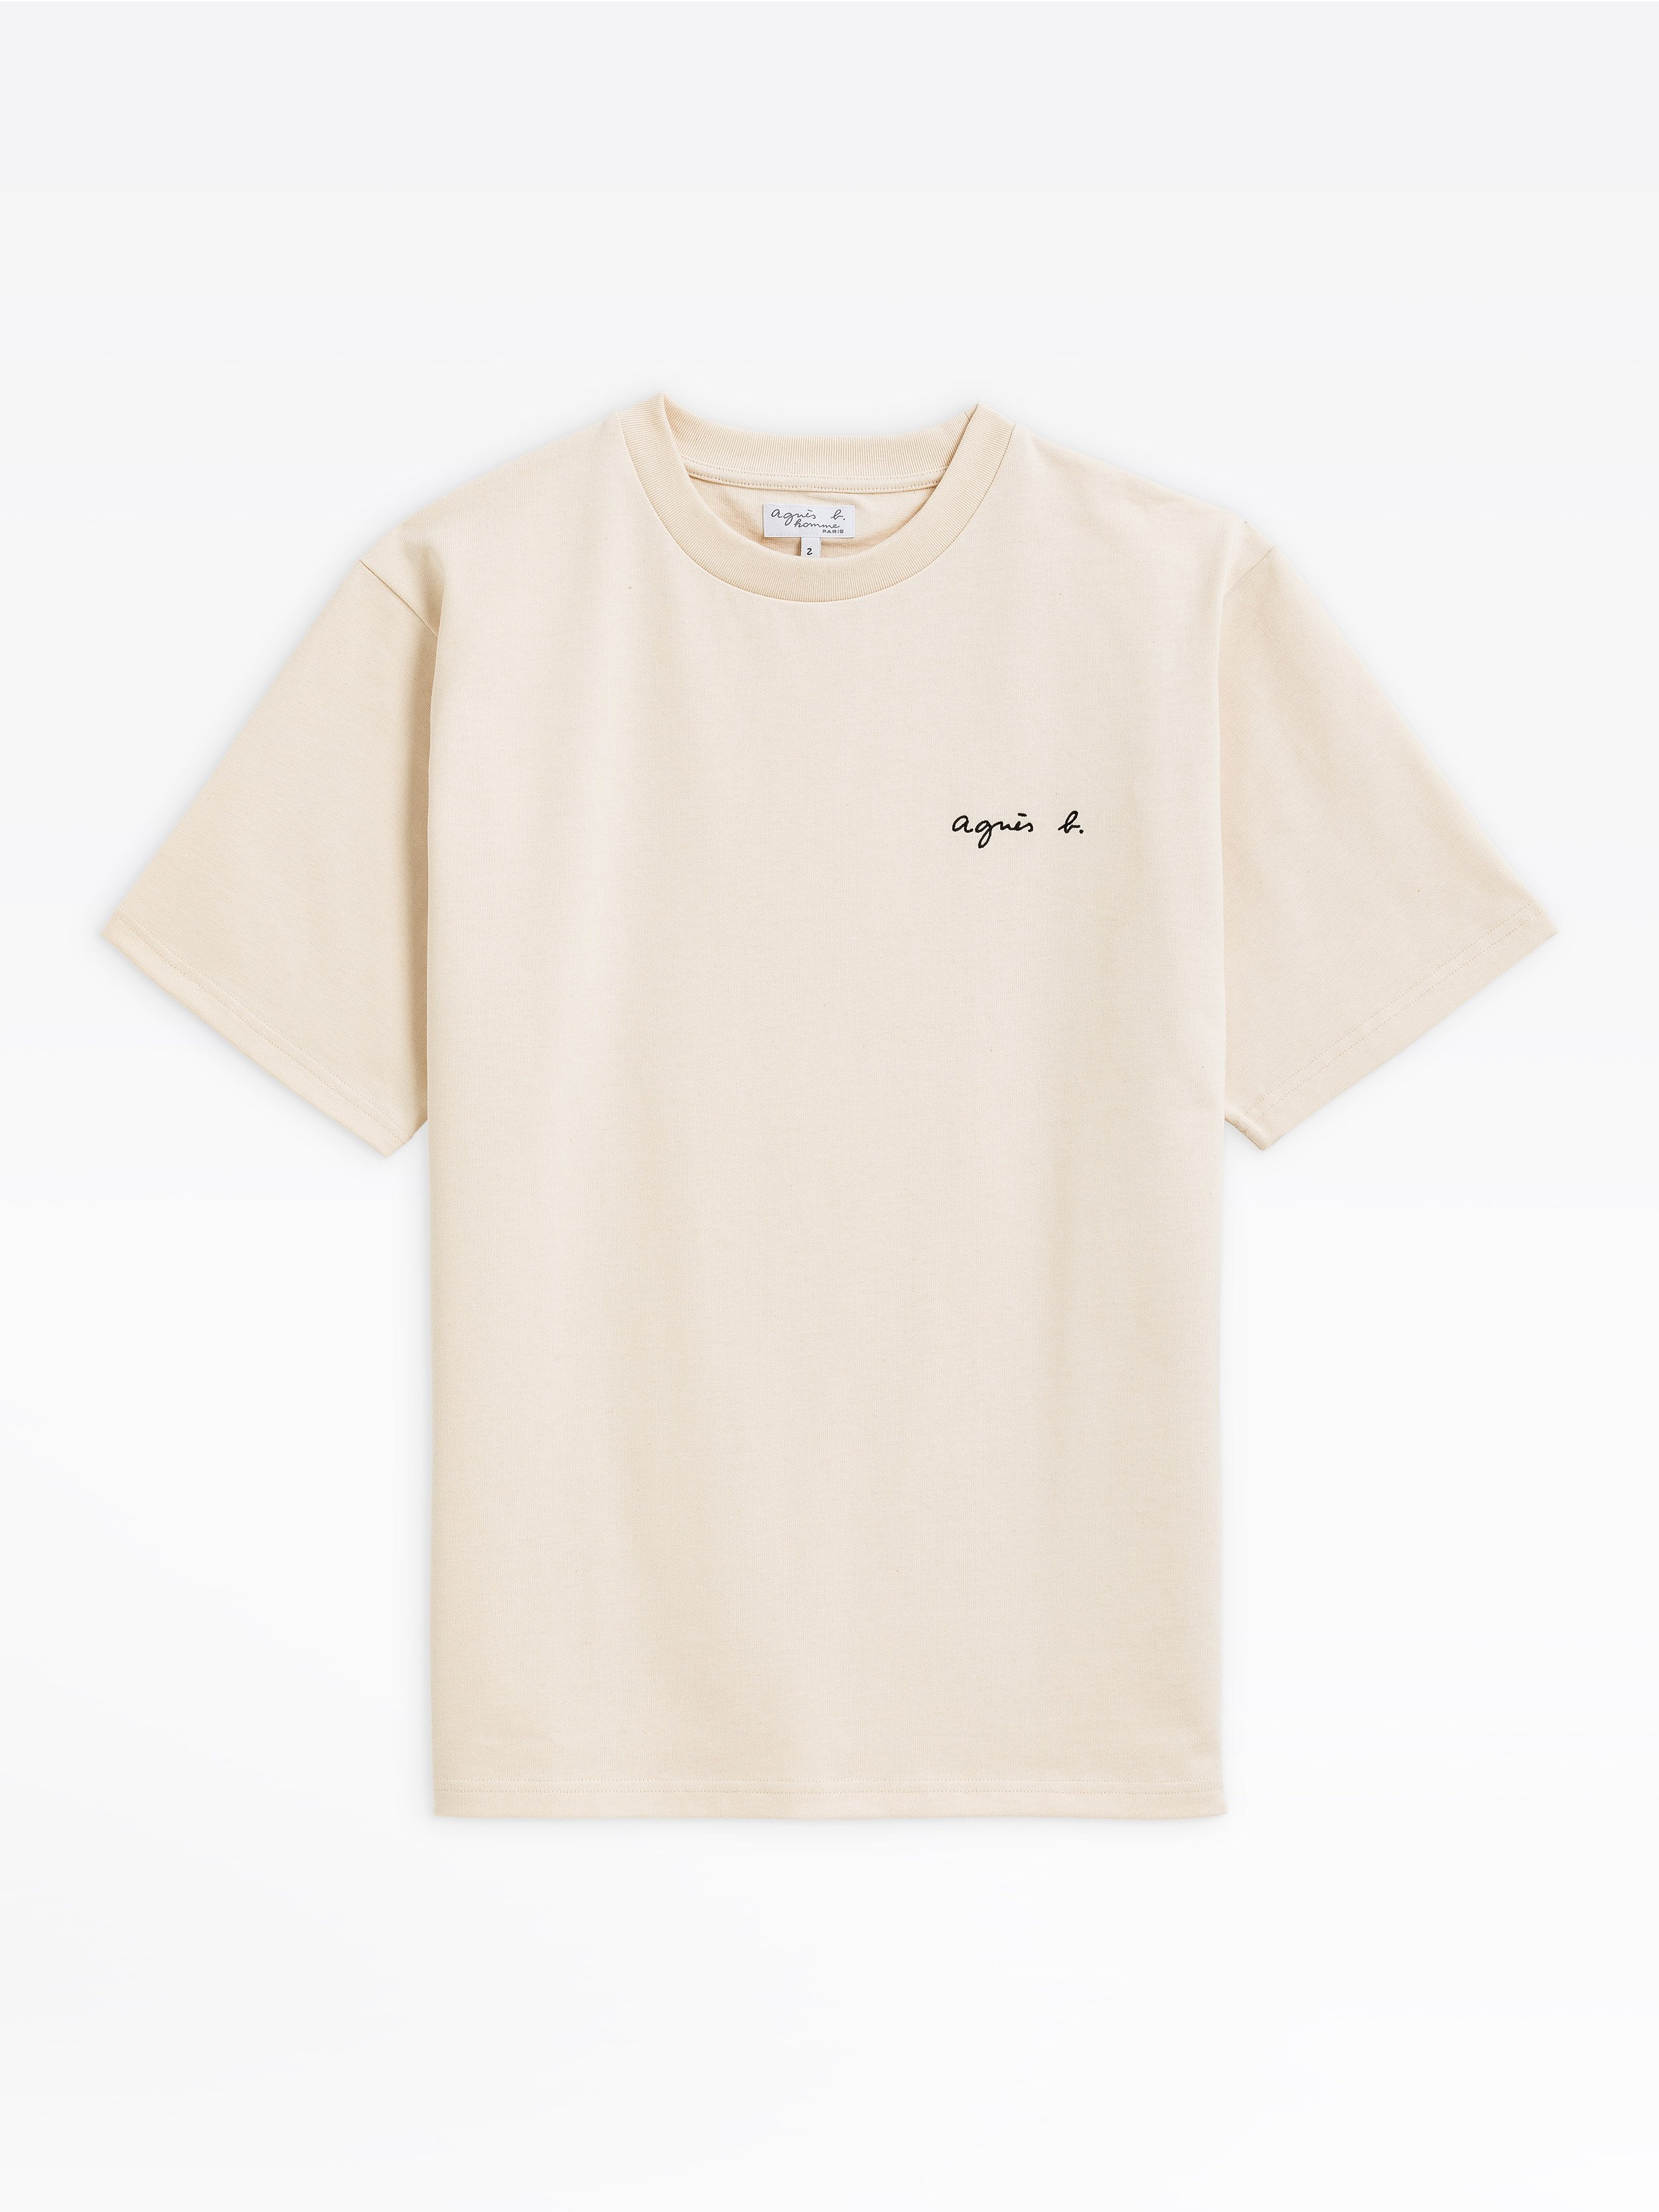 Inferior Snack Be excited off white thick cotton Christof t-shirt with agnès b. logo | agnès b.